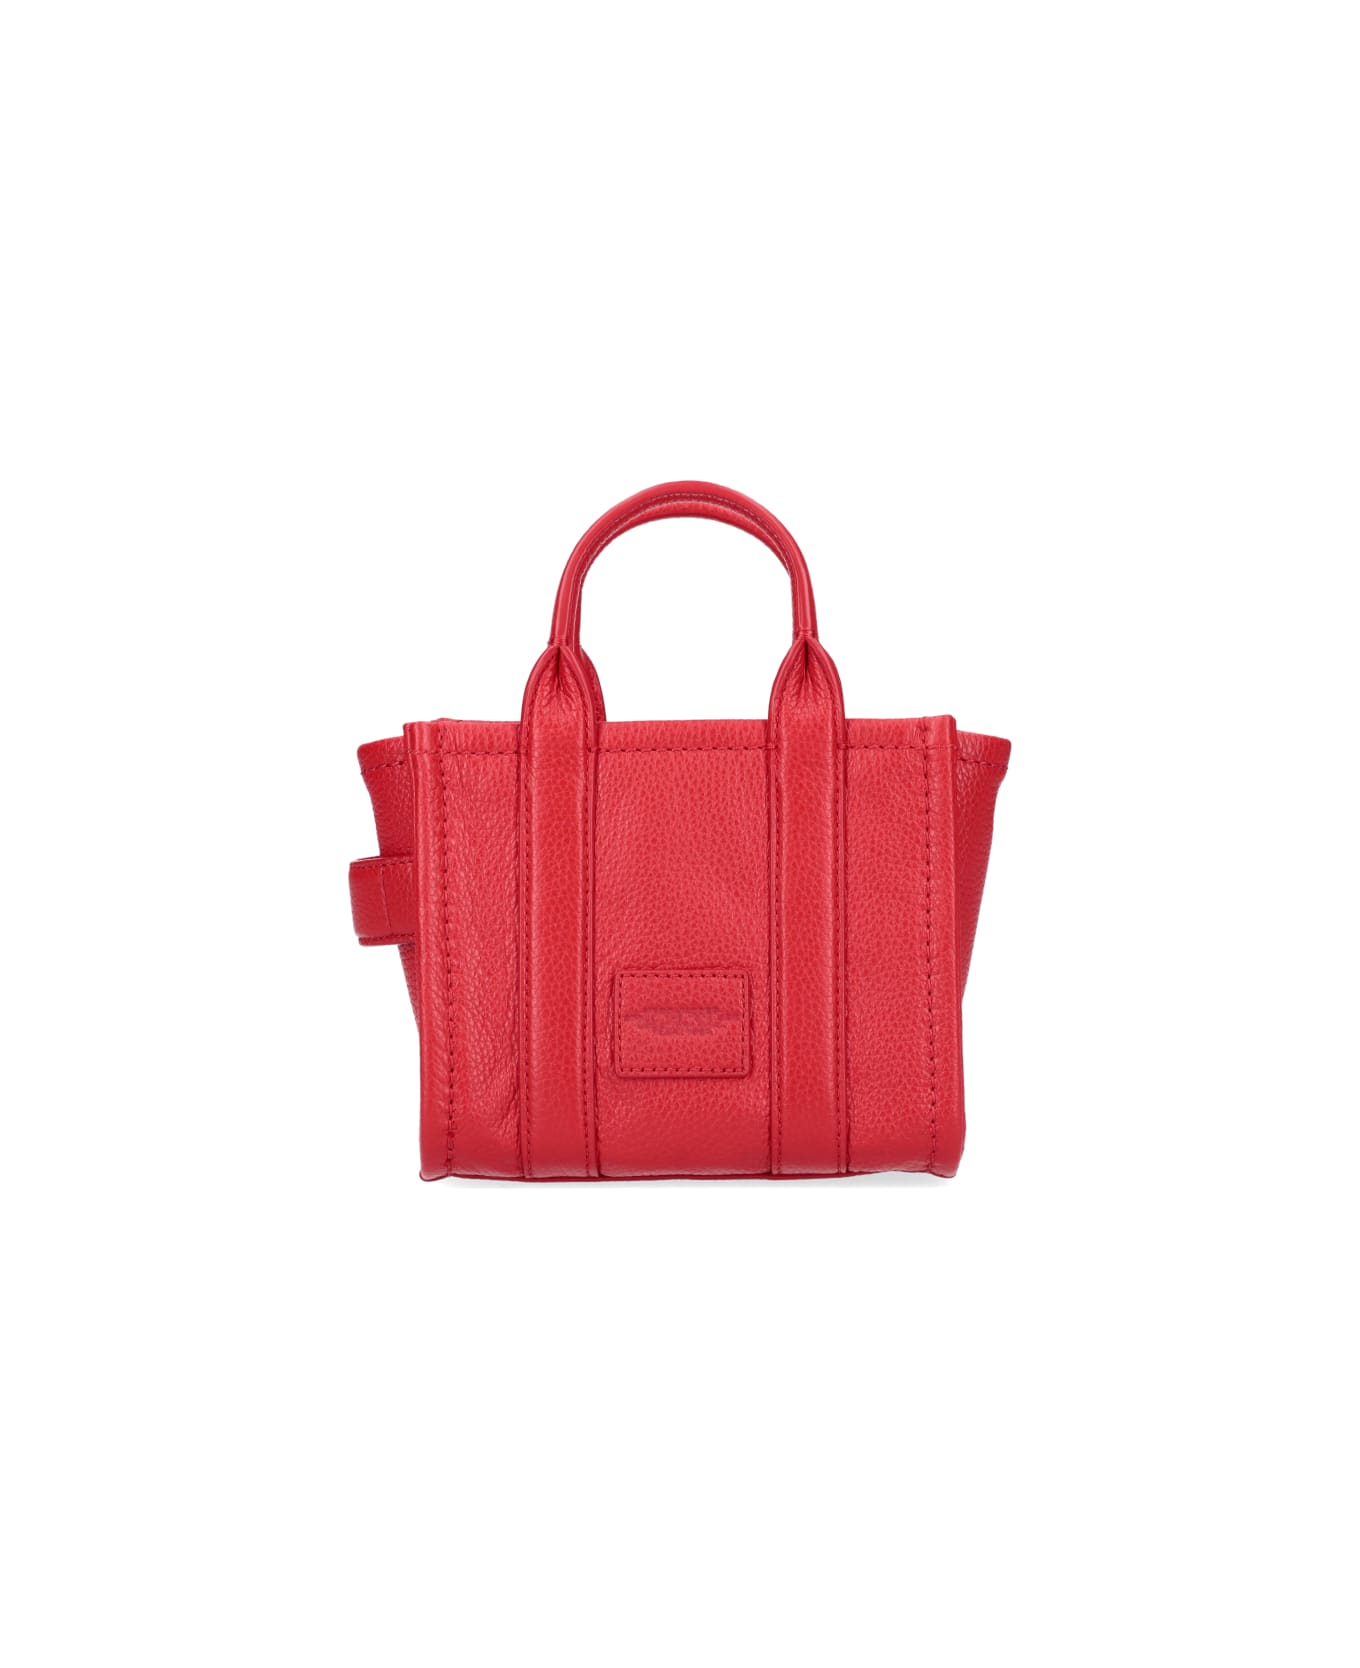 Marc Jacobs Micro Tote Leather Handbag - Red